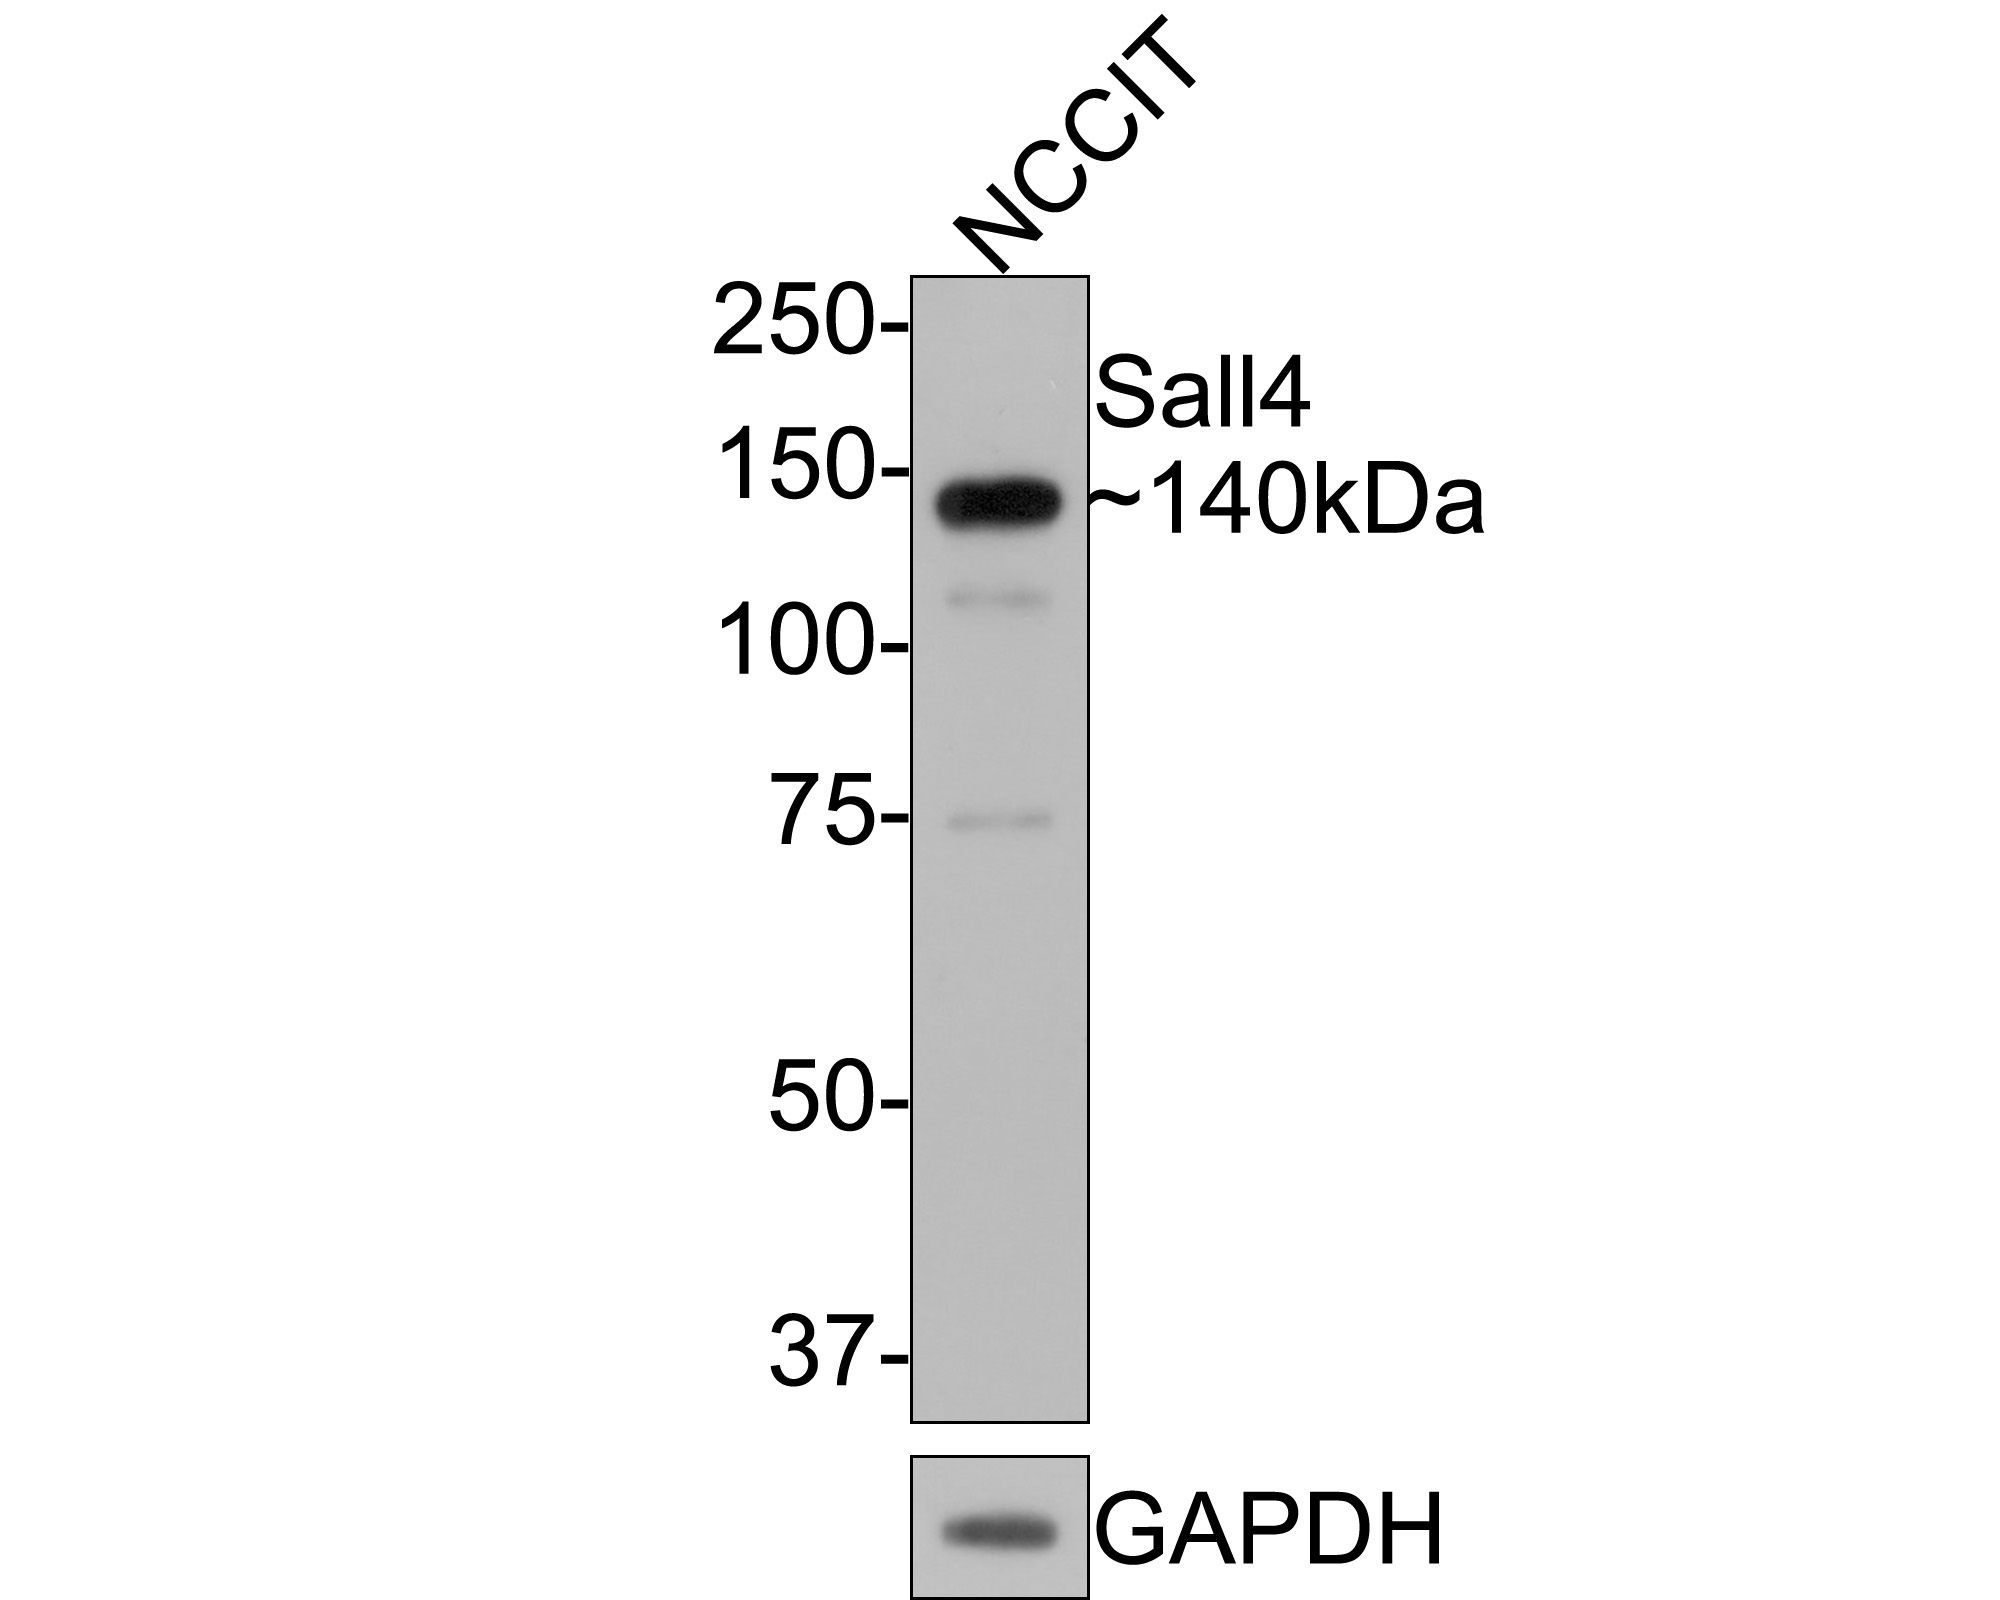 Western blot analysis of Sall4 on NCCIT cell lysates with Mouse anti-Sall4 antibody (HA600089) at 1/2,000 dilution.<br />
<br />
Lysates/proteins at 10 µg/Lane.<br />
<br />
Predicted band size: 112 kDa<br />
Observed band size: 140/110/75 kDa<br />
<br />
Exposure time: 1 minute;<br />
<br />
8% SDS-PAGE gel.<br />
<br />
Proteins were transferred to a PVDF membrane and blocked with 5% NFDM/TBST for 1 hour at room temperature. The primary antibody (HA600089) at 1/2,000 dilution was used in 5% NFDM/TBST at room temperature for 2 hours. Goat Anti-Mouse IgG - HRP Secondary Antibody (HA1006) at 1:100,000 dilution was used for 1 hour at room temperature.